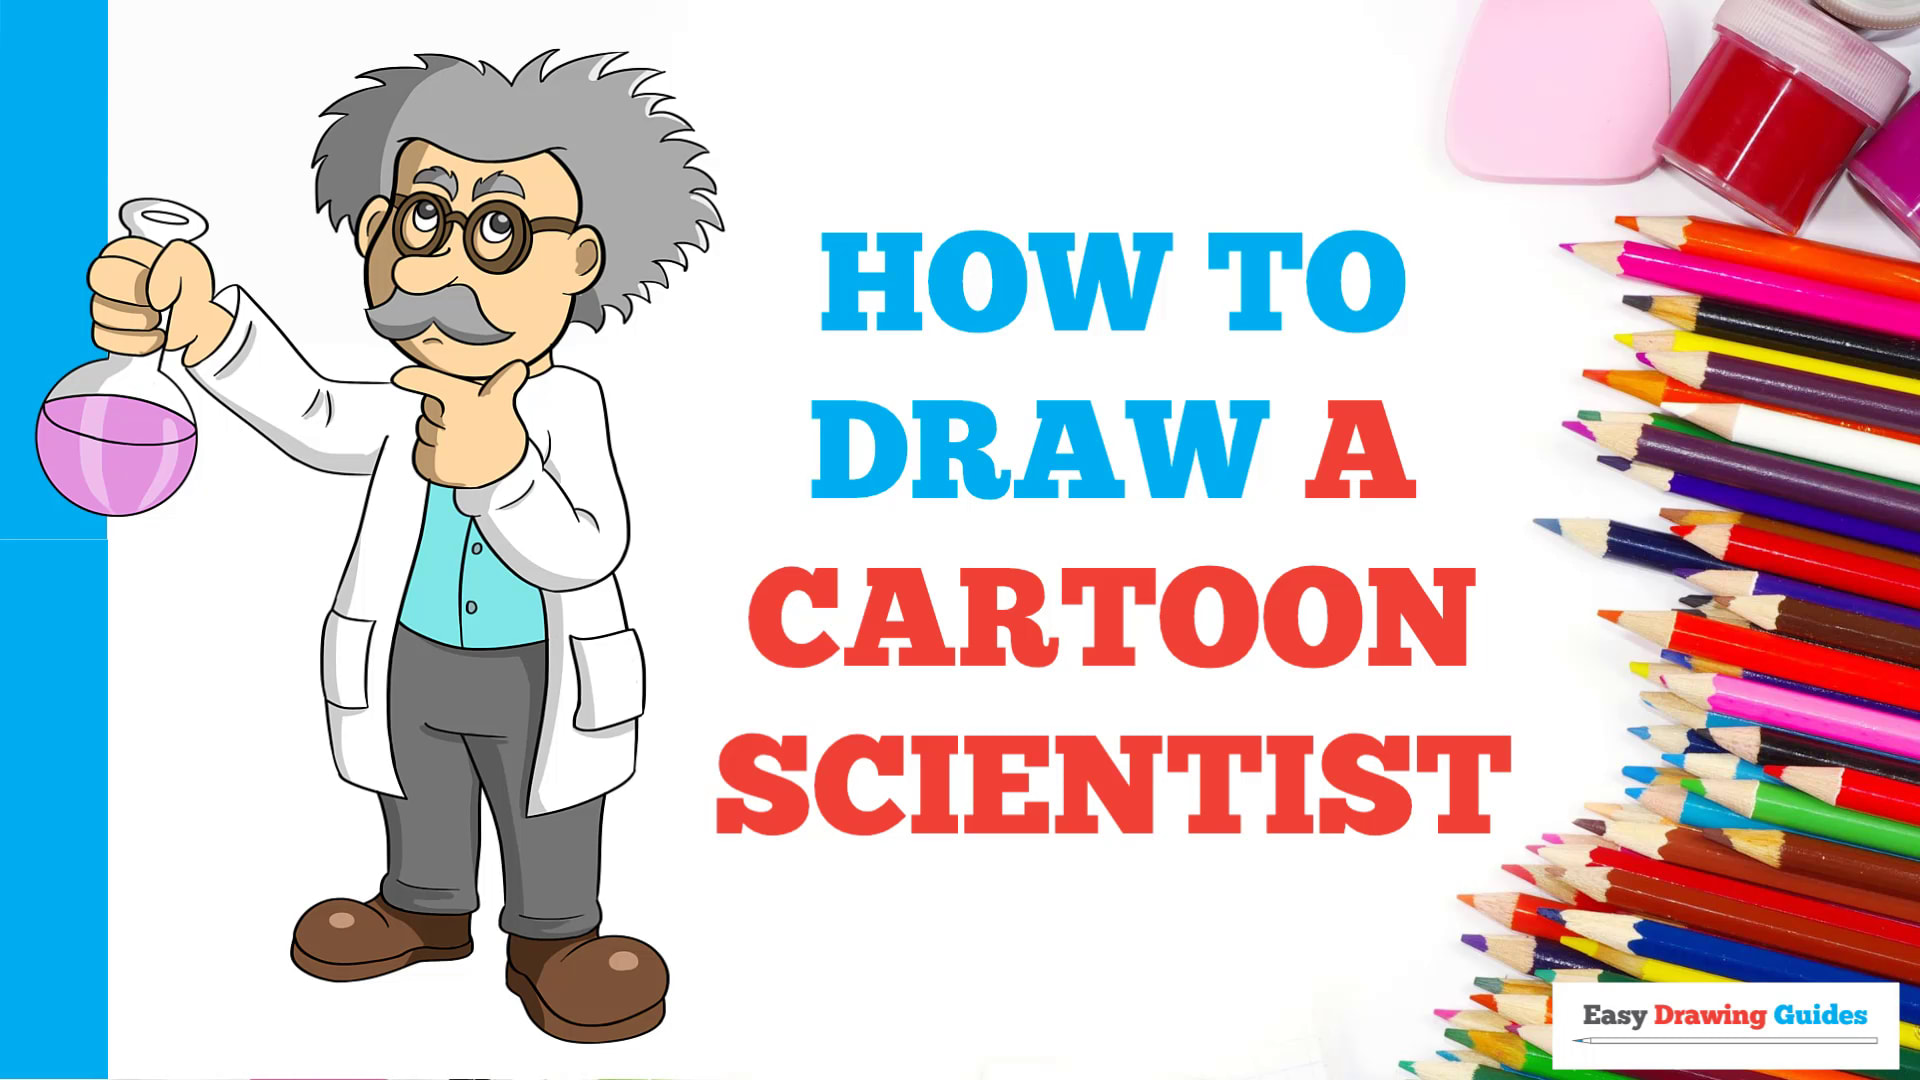 How to Draw a Cartoon Scientist - Really Easy Drawing Tutorial